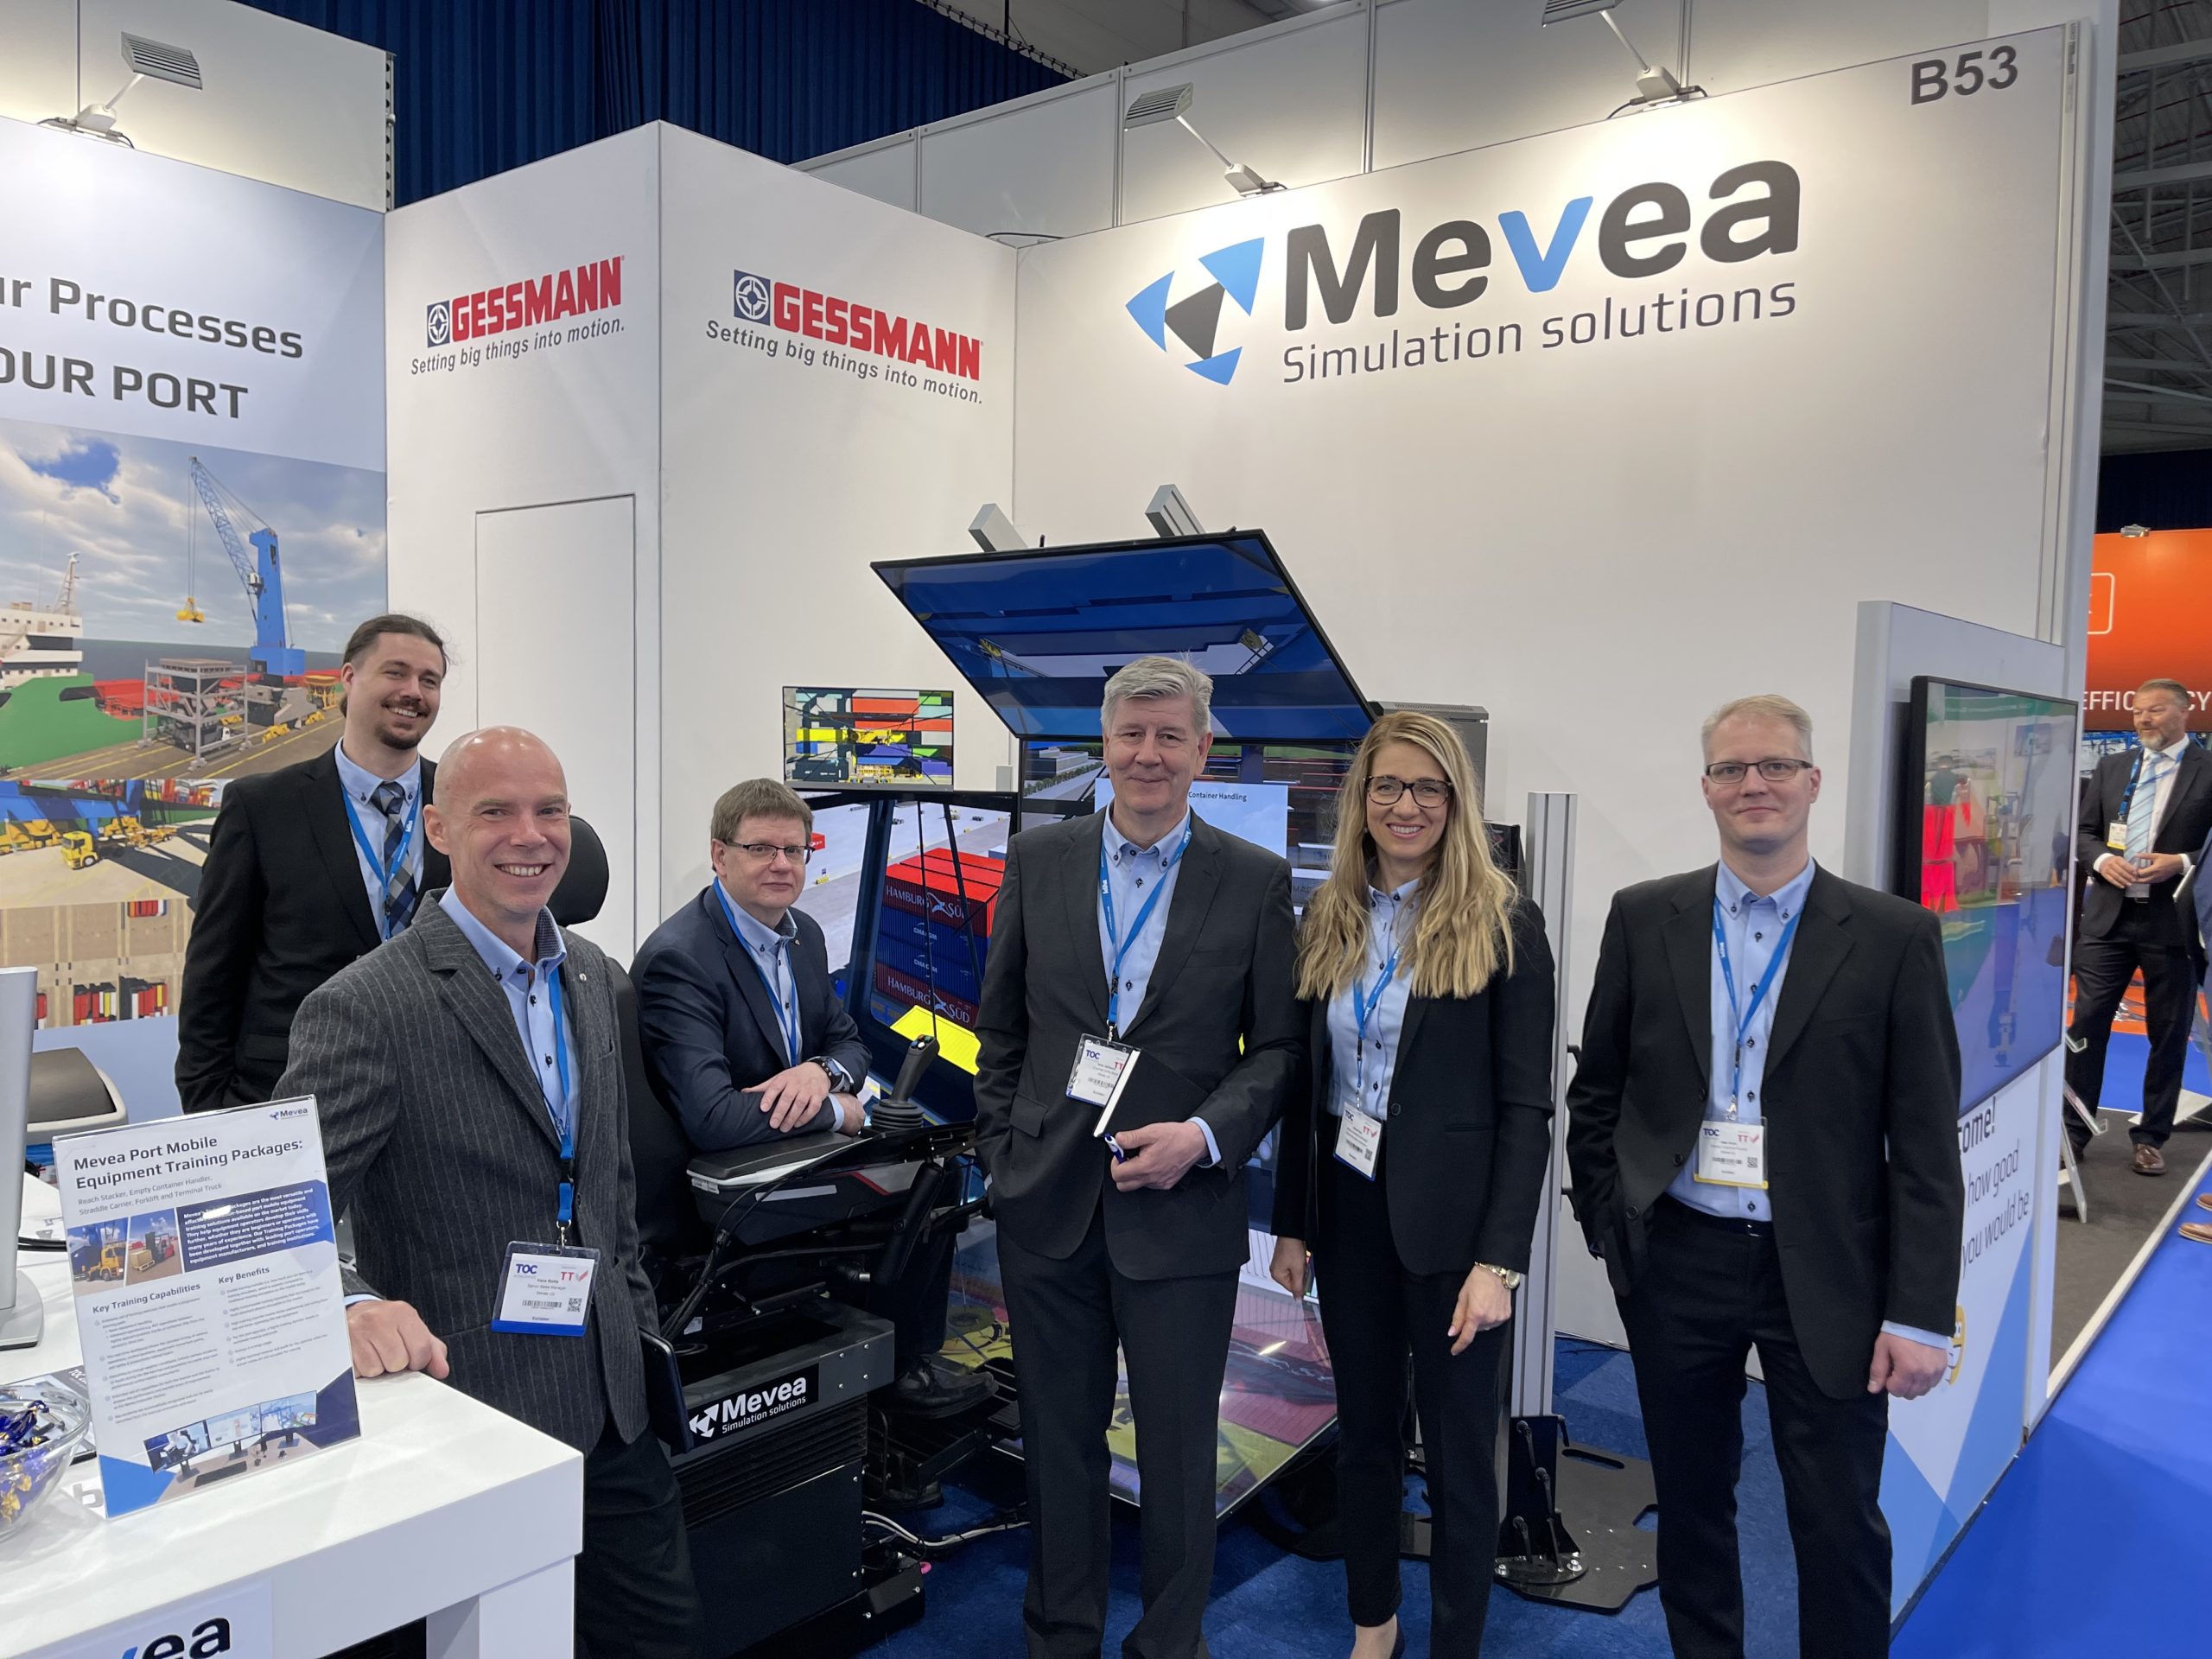 Members of mevea team standing infront of the simulator at the exhibition stand.